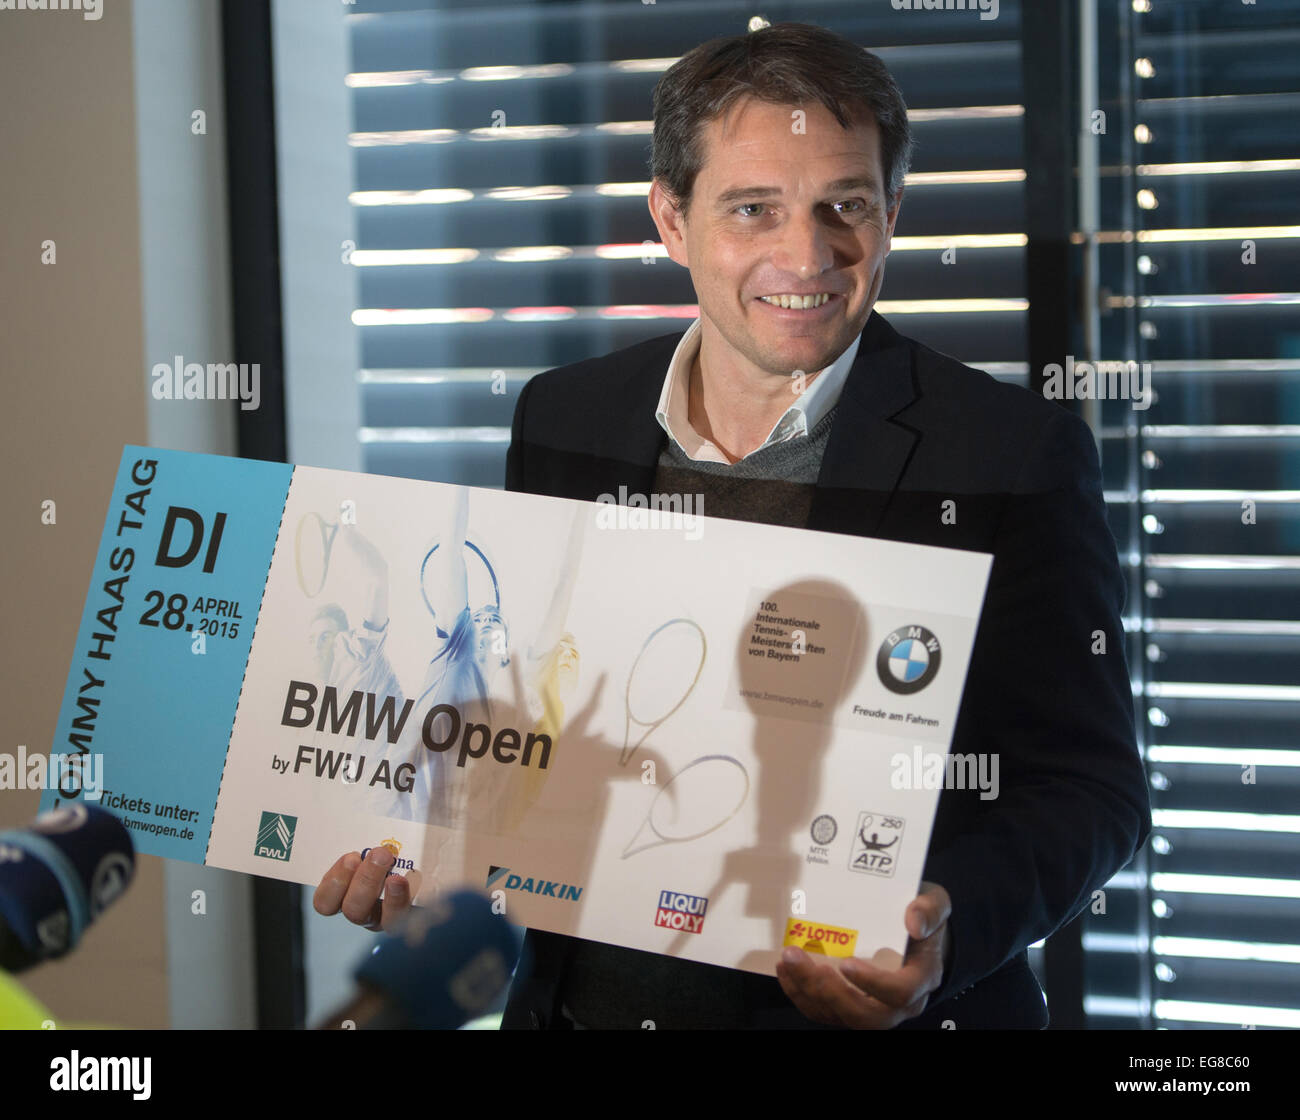 Munich, Bavaria, Germany. 19th Feb, 2015. The organiser of the BMW Open by FWU AG Michael Mronz during a press conference in Munich, Bavaria, Germany, 19 February 2015. Photo: Peter Kneffel/dpa/Alamy Live News Stock Photo